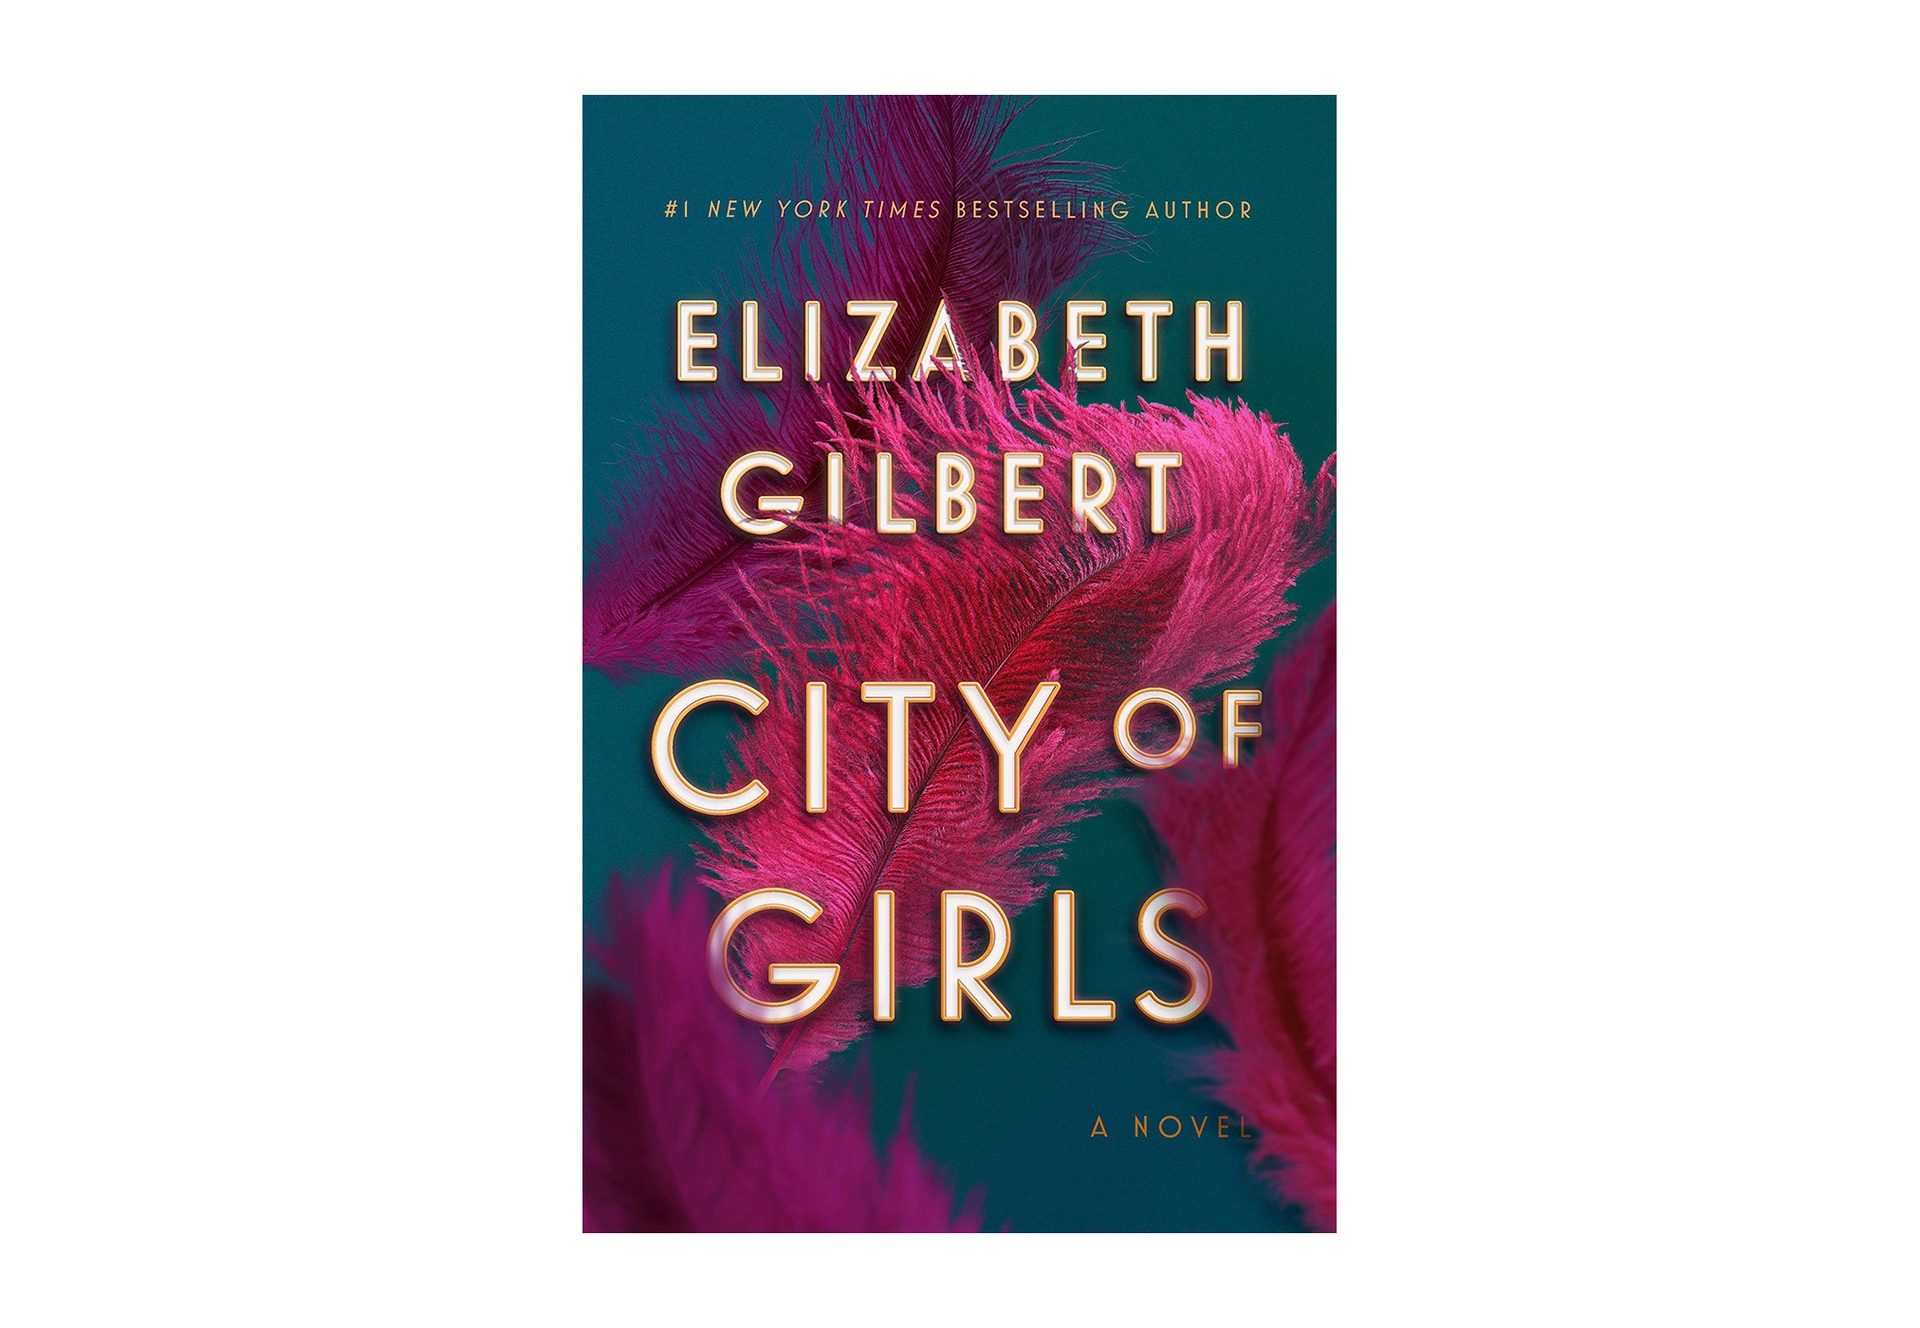 Book cover for "City of Girls" by Elizabeth Gilbert, font is capitalized, in ivory with gold borders, on top of a teal blue background with bright pink feathers drifting across the space.